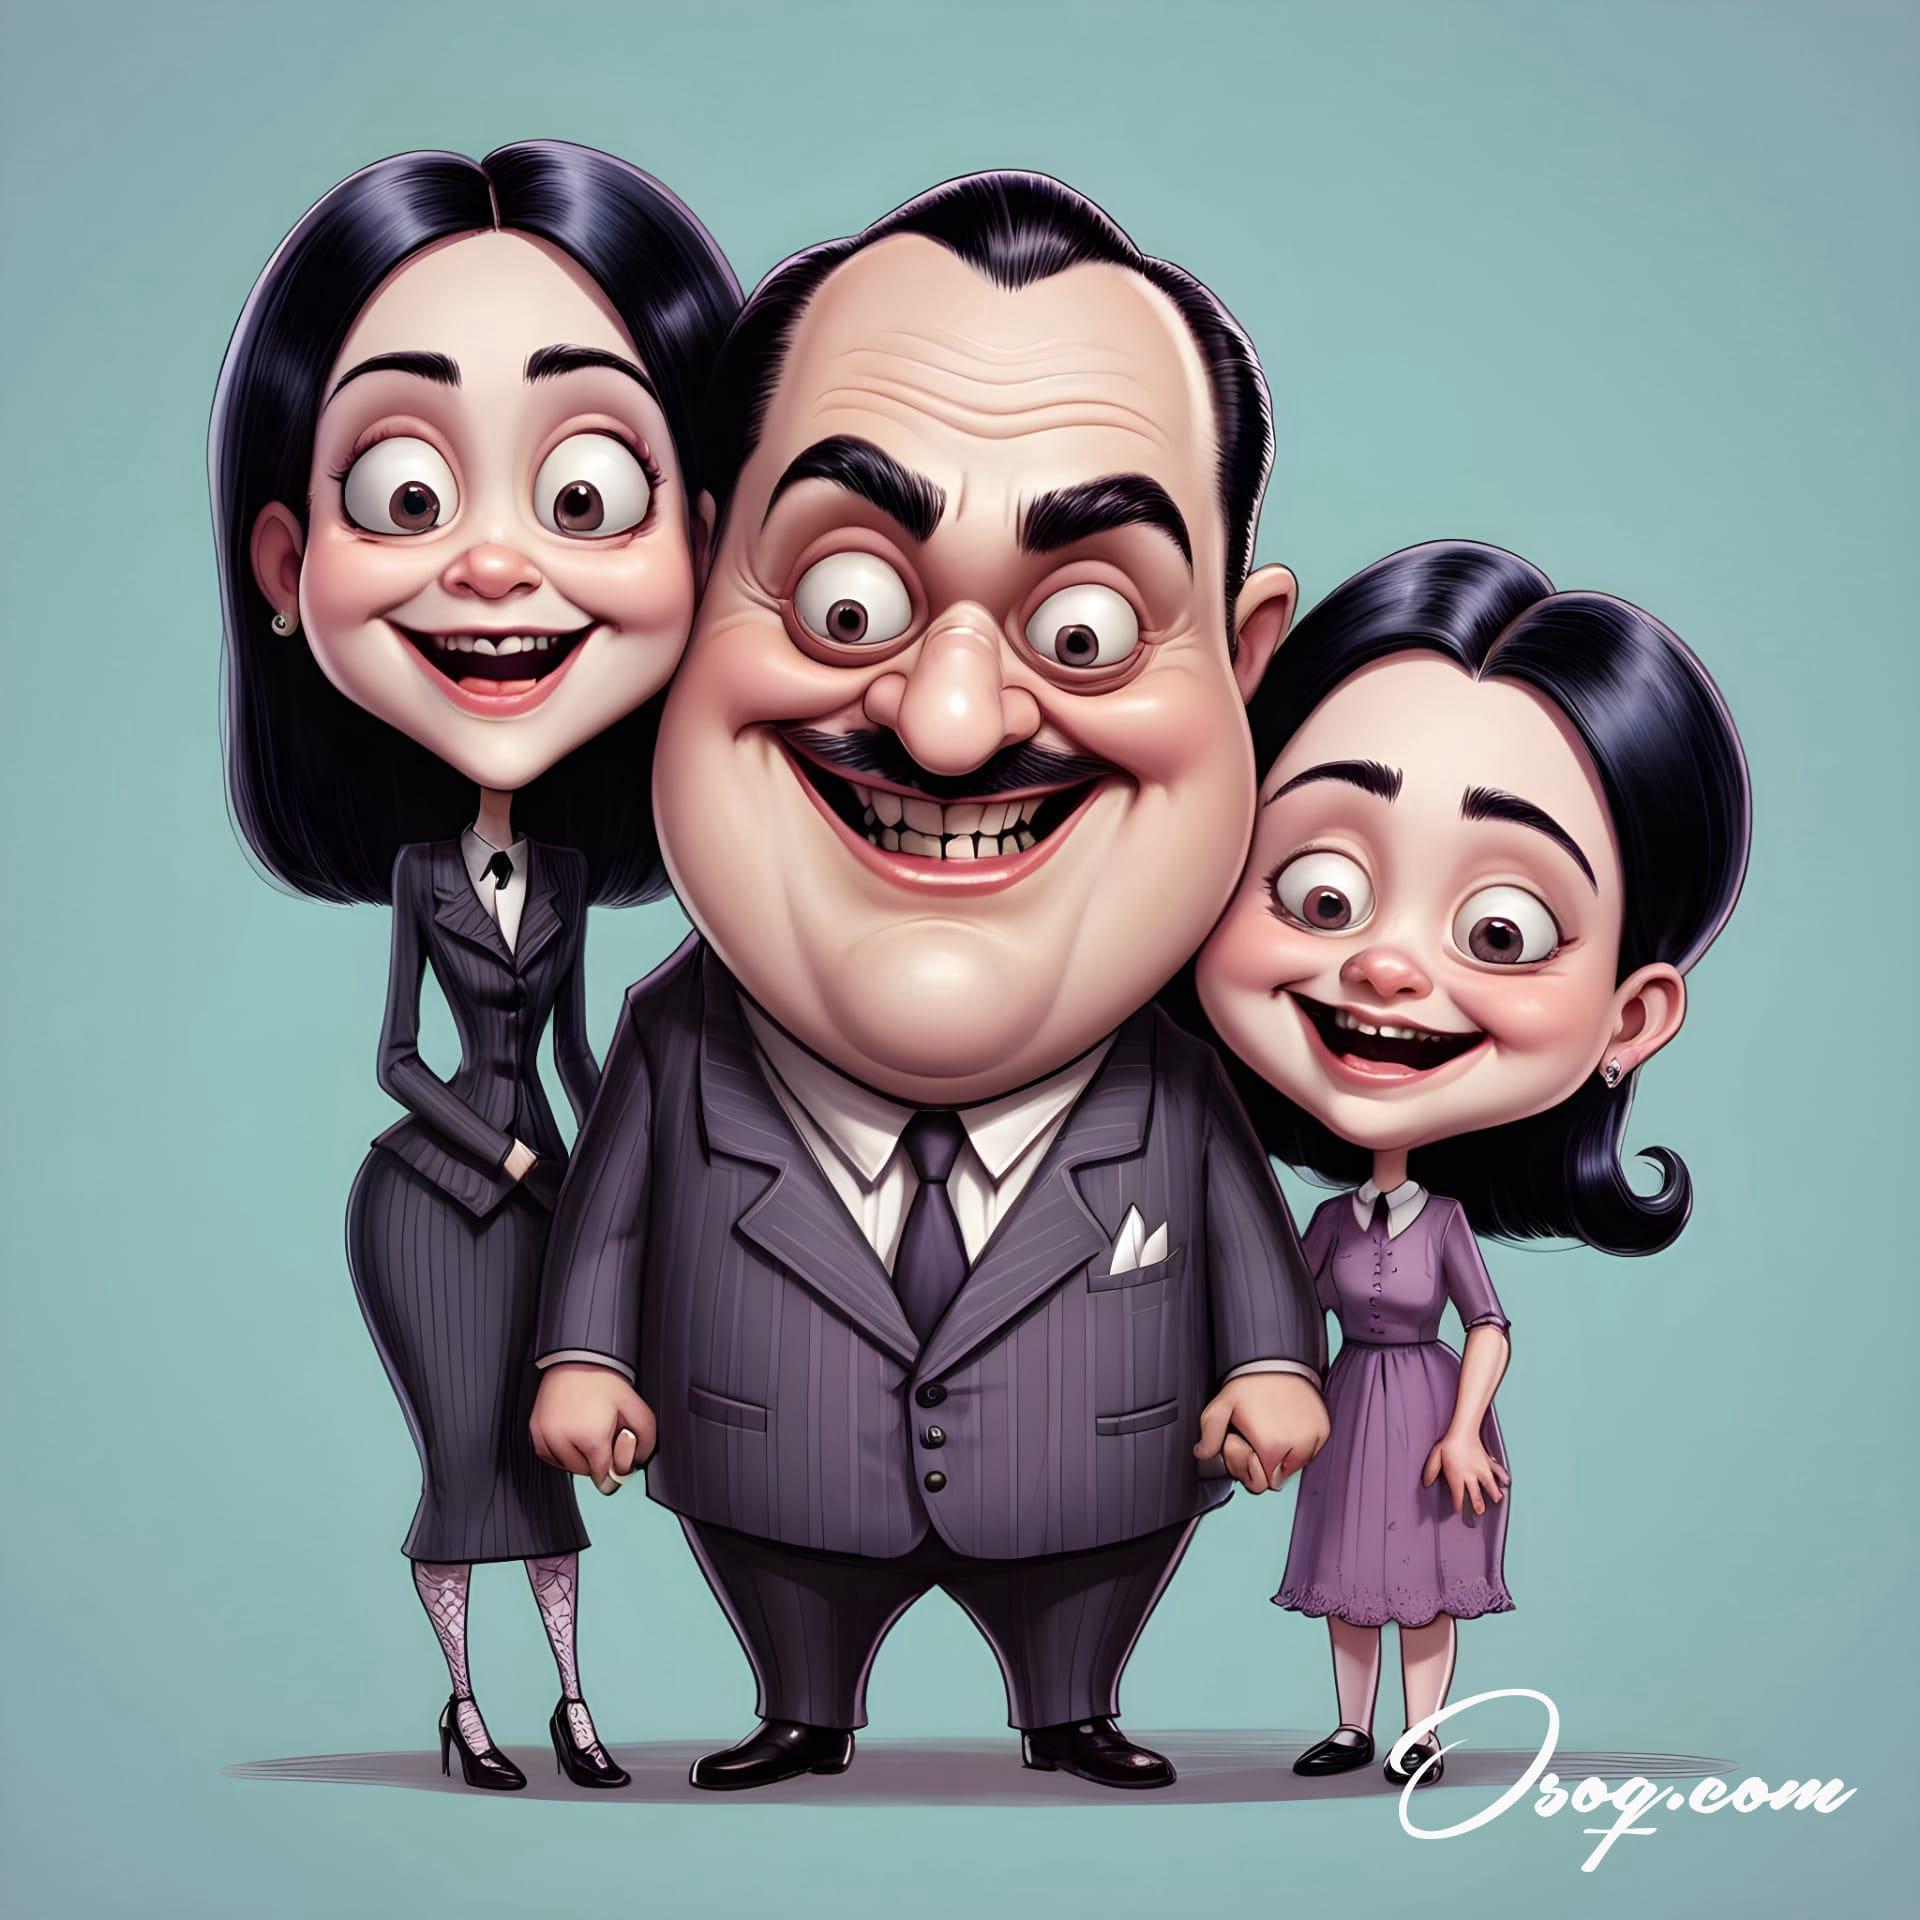 Addams family caricature 08